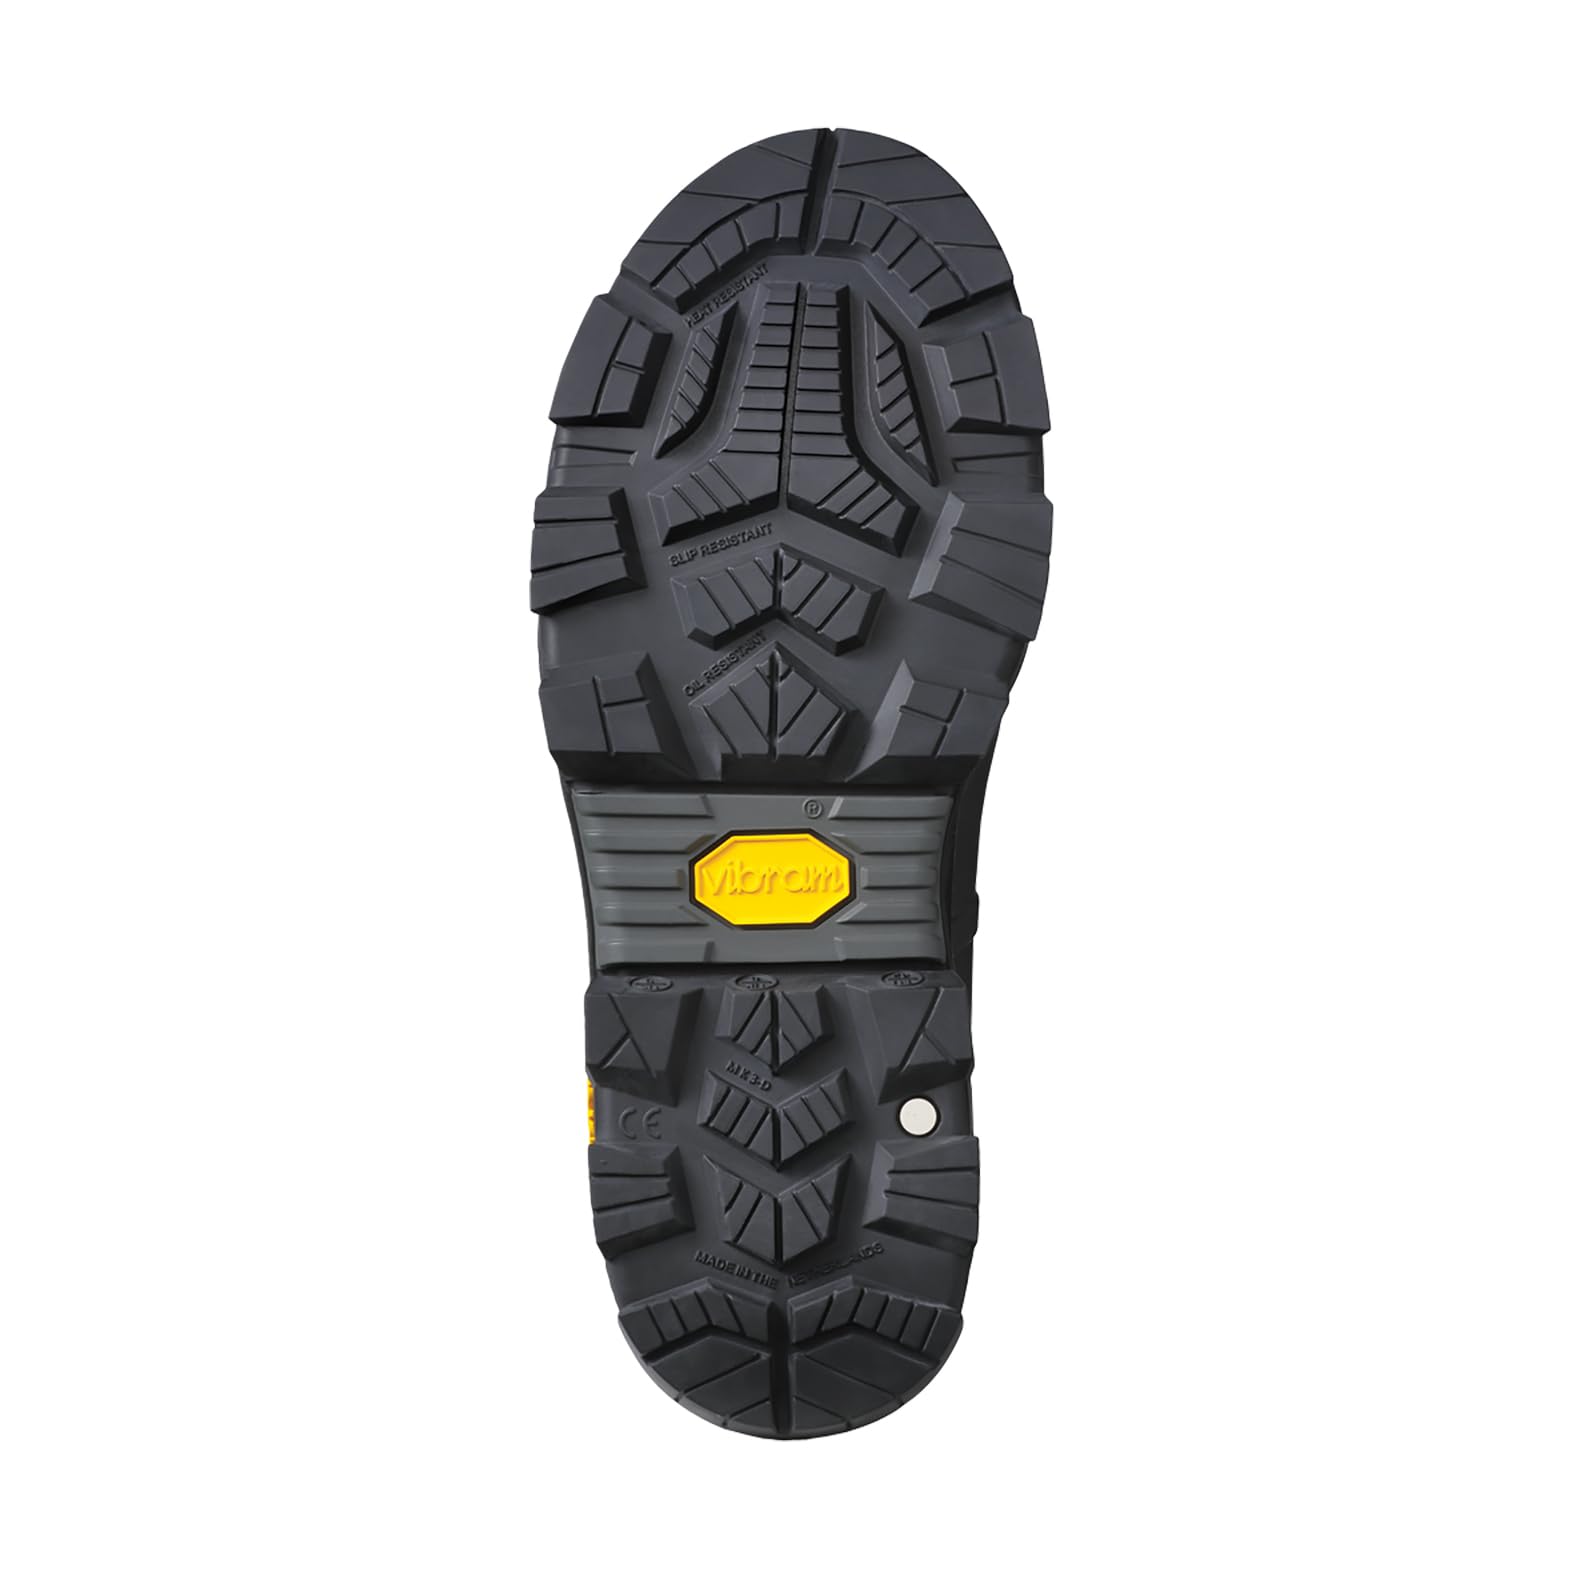 Dunlop Men's CC22A33 Purofort+ Expander Full Safety with Vibram Sole,100% Waterproof,PVC, Lightweight and Durable Protective Footwear, Black, 7